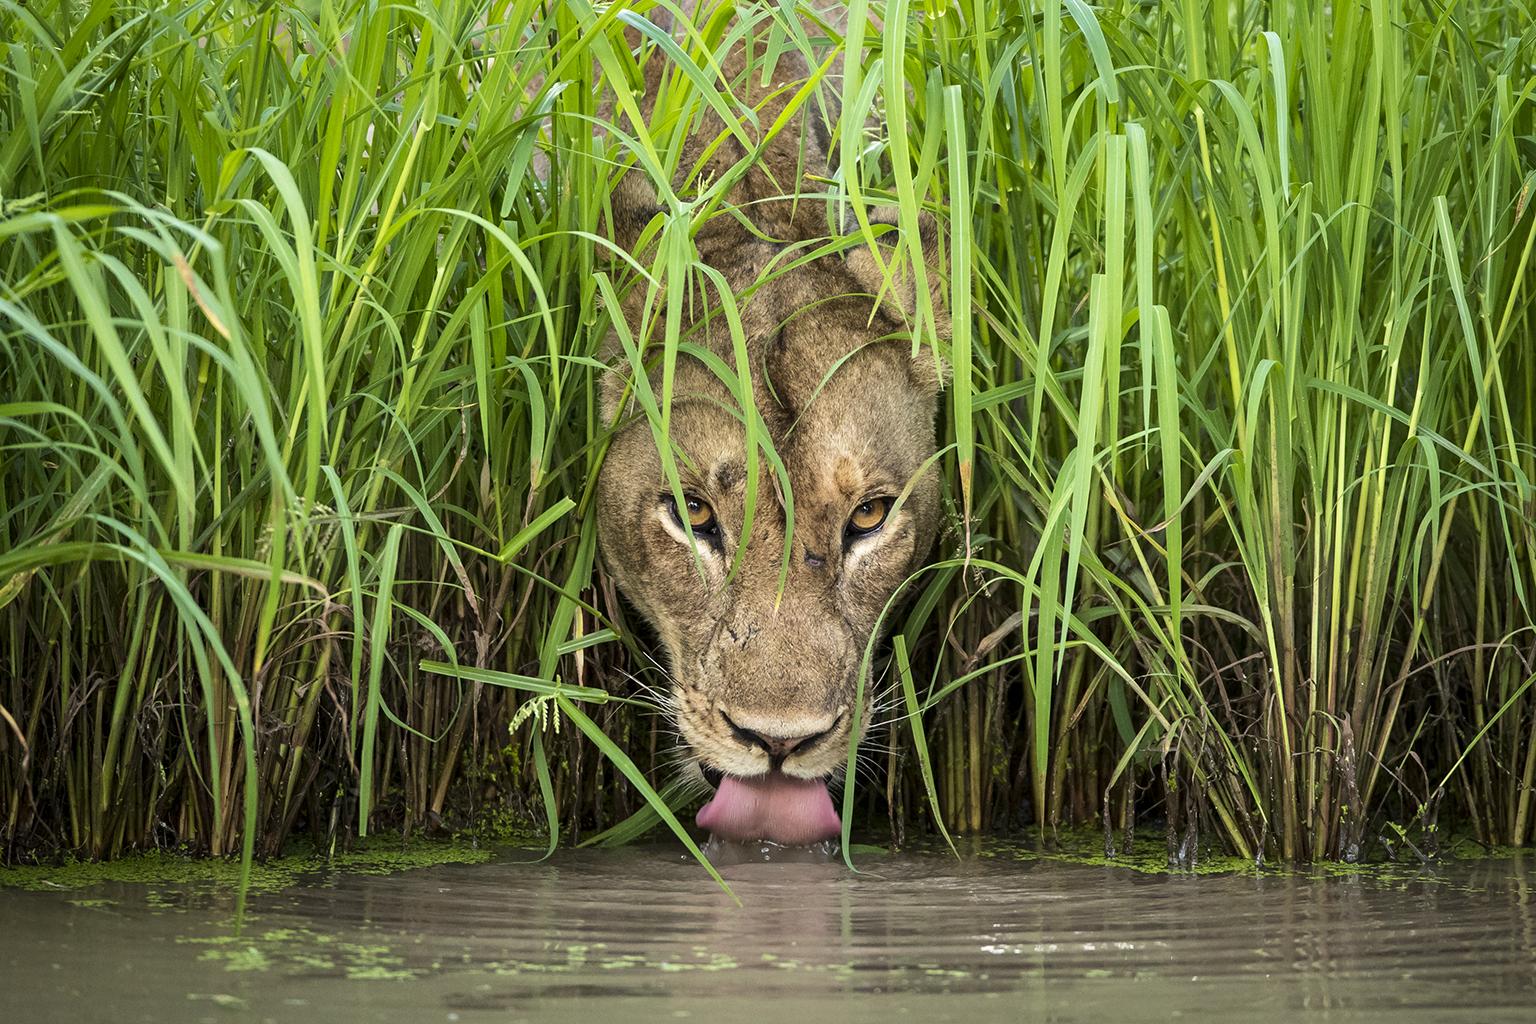 A lioness drinks from a waterhole in Zambia’s South Luangwa National Park. (© Isak Pretorius, South Africa)